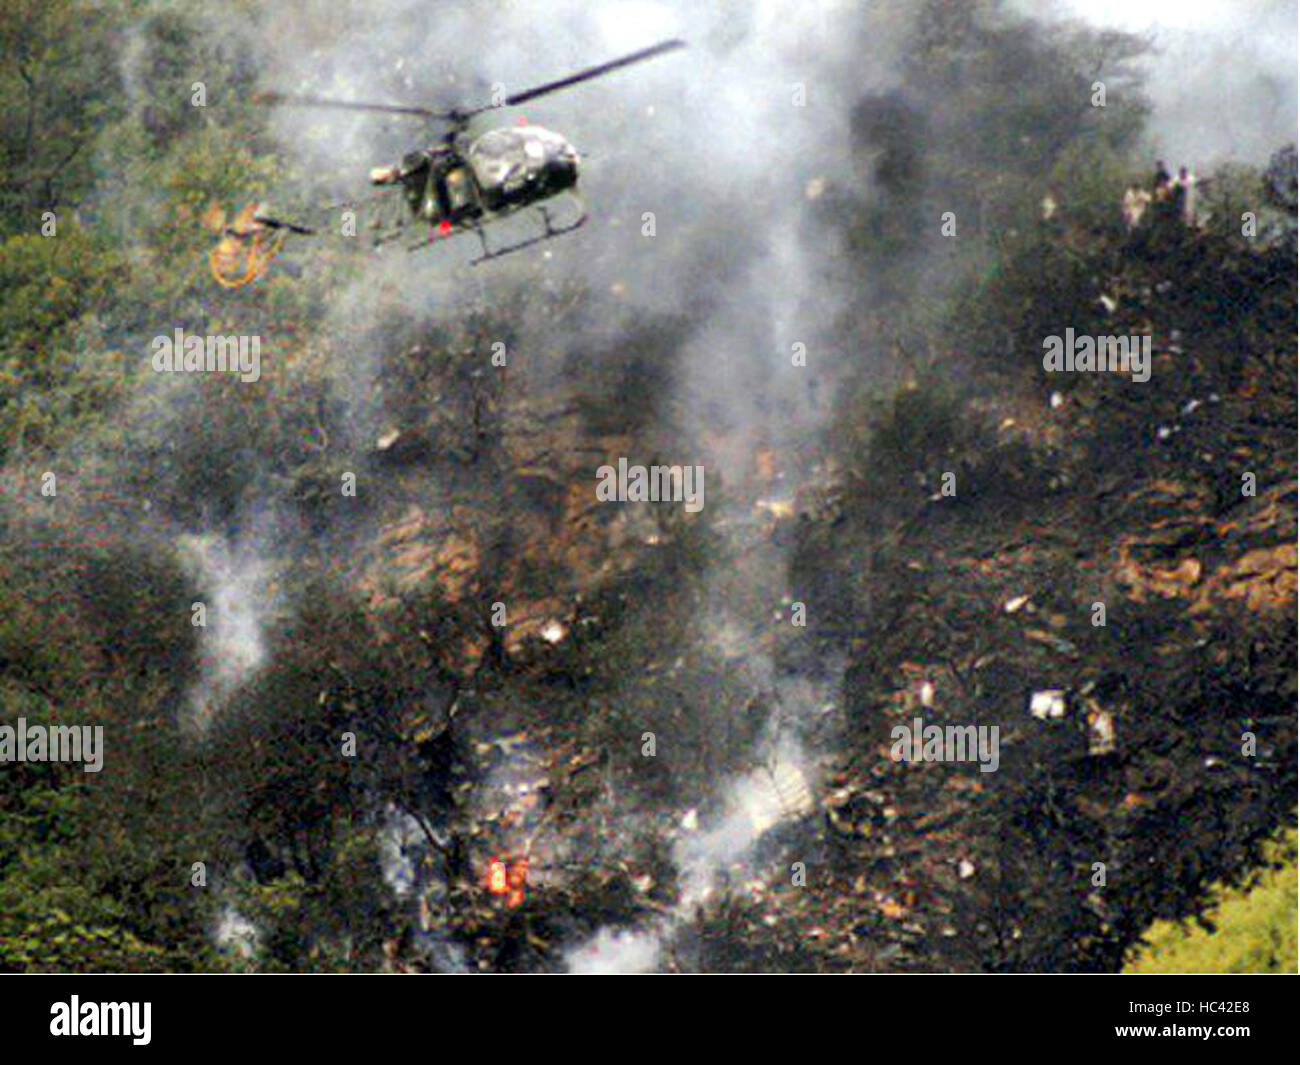 Havelian, Pakistan. 7th December, 2016. Photo taken on Dec. 7, 2016, shows a helicopter flying over the site of a plane crash in northwest Pakistan's Havelian. A passenger plane of Pakistan International Airlines (PIA) with 47 people onboard crashed in the country's northwest Havelian area on Wednesday, officials said. (Xinhua/Stringer) (sxk) Credit:  Xinhua/Alamy Live News Stock Photo